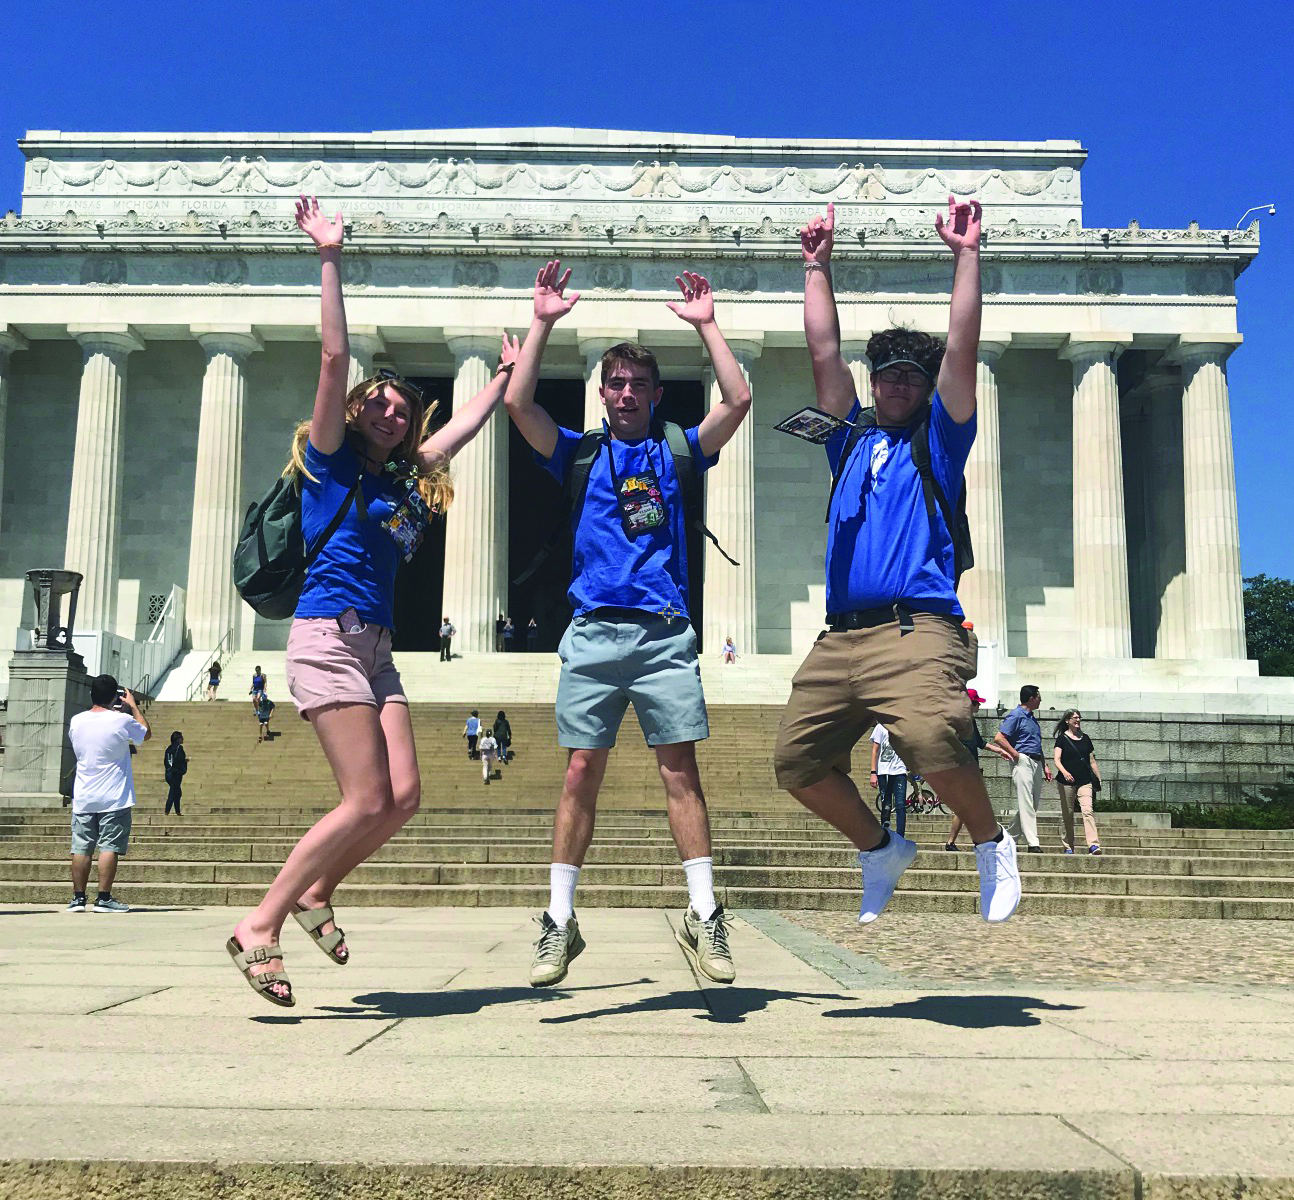 Grace Sekscinski, Kegan Walker and Taylor Davis at the Lincoln Memorial during the 54th annual National Rural Electric Cooperative Association’s (NRECA) Youth Tour.